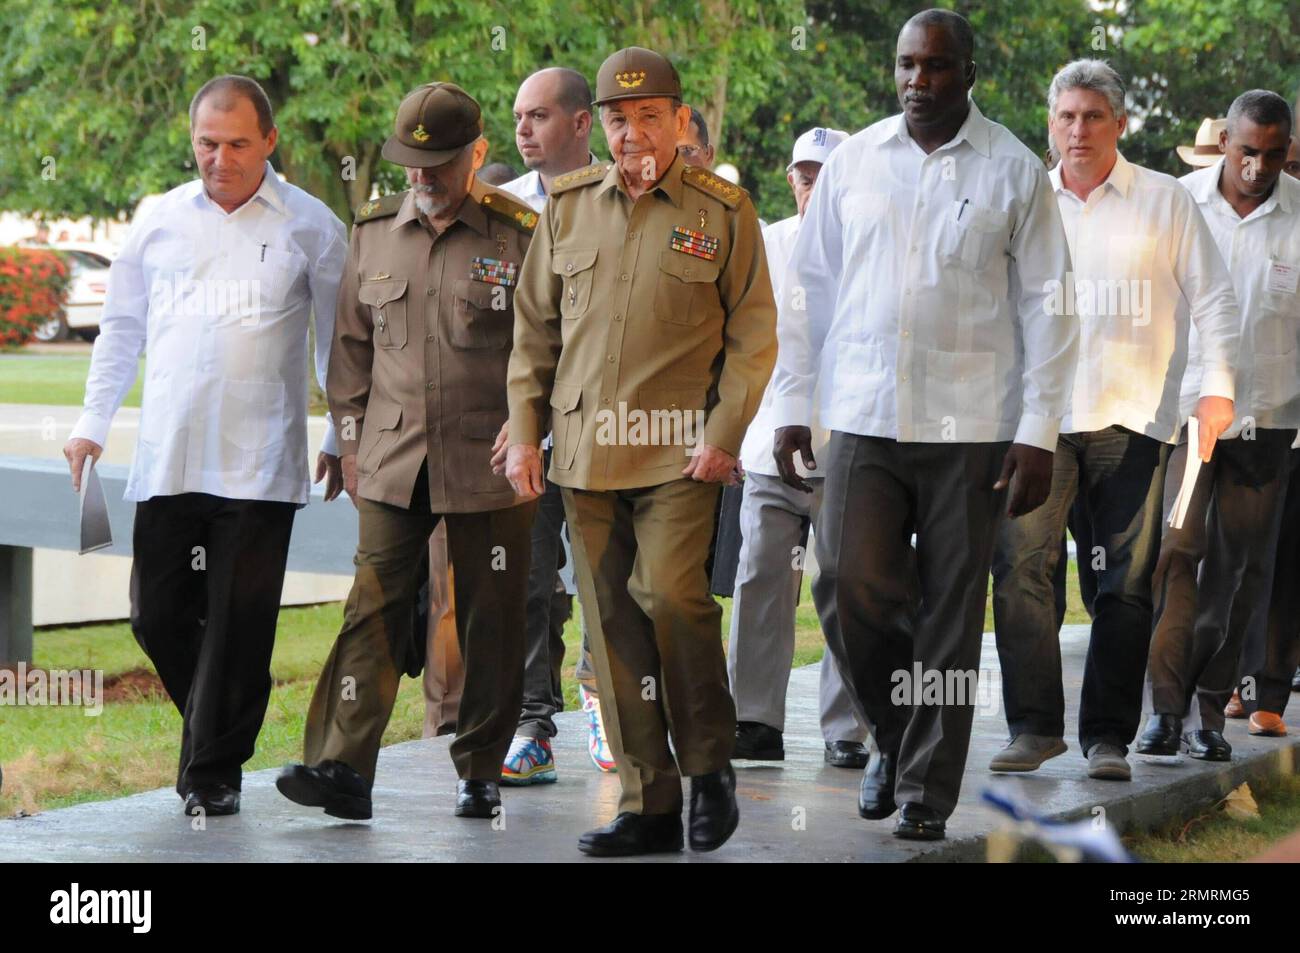 The President of Cuba, Raul Castro(C), accompanied by the first Cuban Vice President, Miguel Diaz Canel (2nd R) arrive for the commemoration ceremony of the National Rebellion Day, in the Mausoleum of the Martyrs, in Artemisa town, Havana Province, Cuba, on July 26, 2014. On July 26, 1953 was the beginning of the Cuban Revolution led by Fidel Castro. (Xinhua/Prensa Latina) CUBA-ARTEMISA-NATIONAL REBELLION DAY-COMMEMORATION PUBLICATIONxNOTxINxCHN   The President of Cuba Raul Castro C accompanied by The First Cuban Vice President Miguel Diaz Canel 2nd r Arrive for The Commemoration Ceremony of T Stock Photo